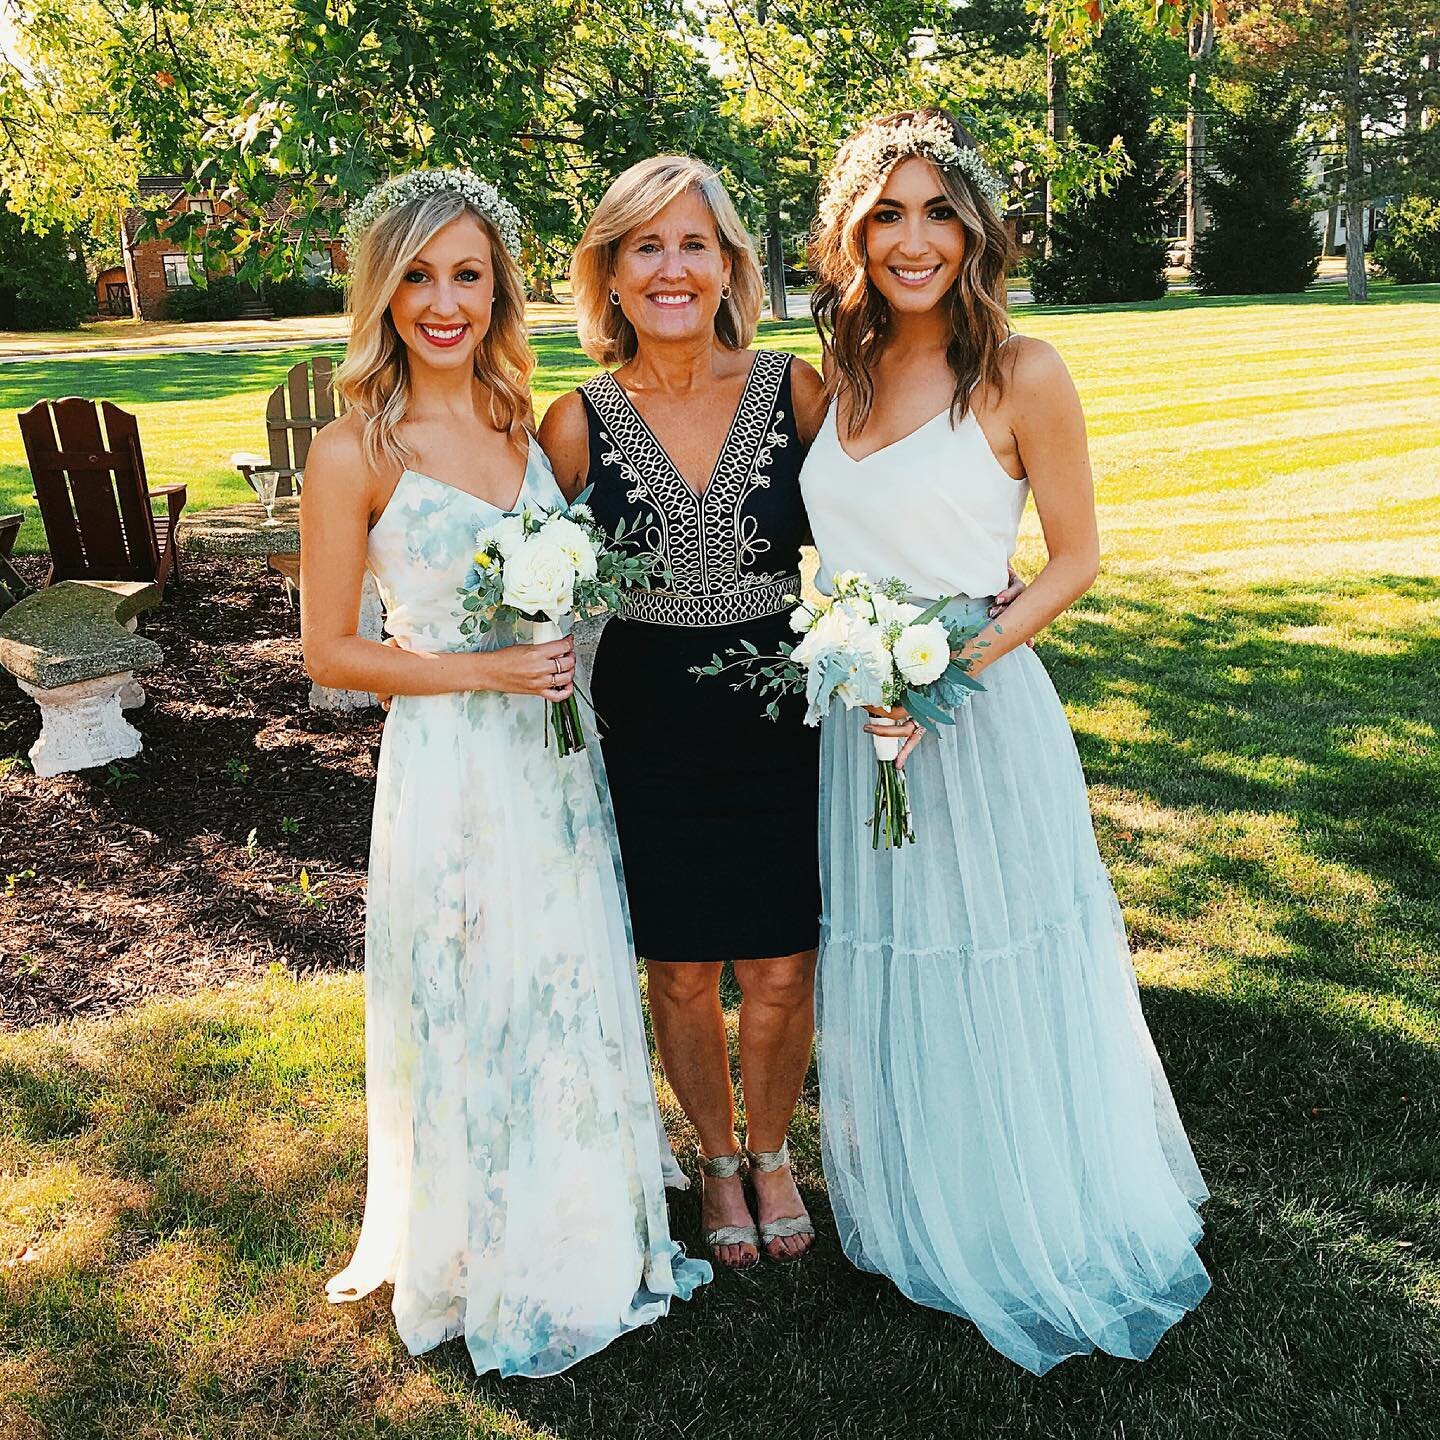 Happy Mother&rsquo;s Day to my beautiful mama! We love you so much and we are beyond lucky to have you as our mom! ❤️❤️❤️